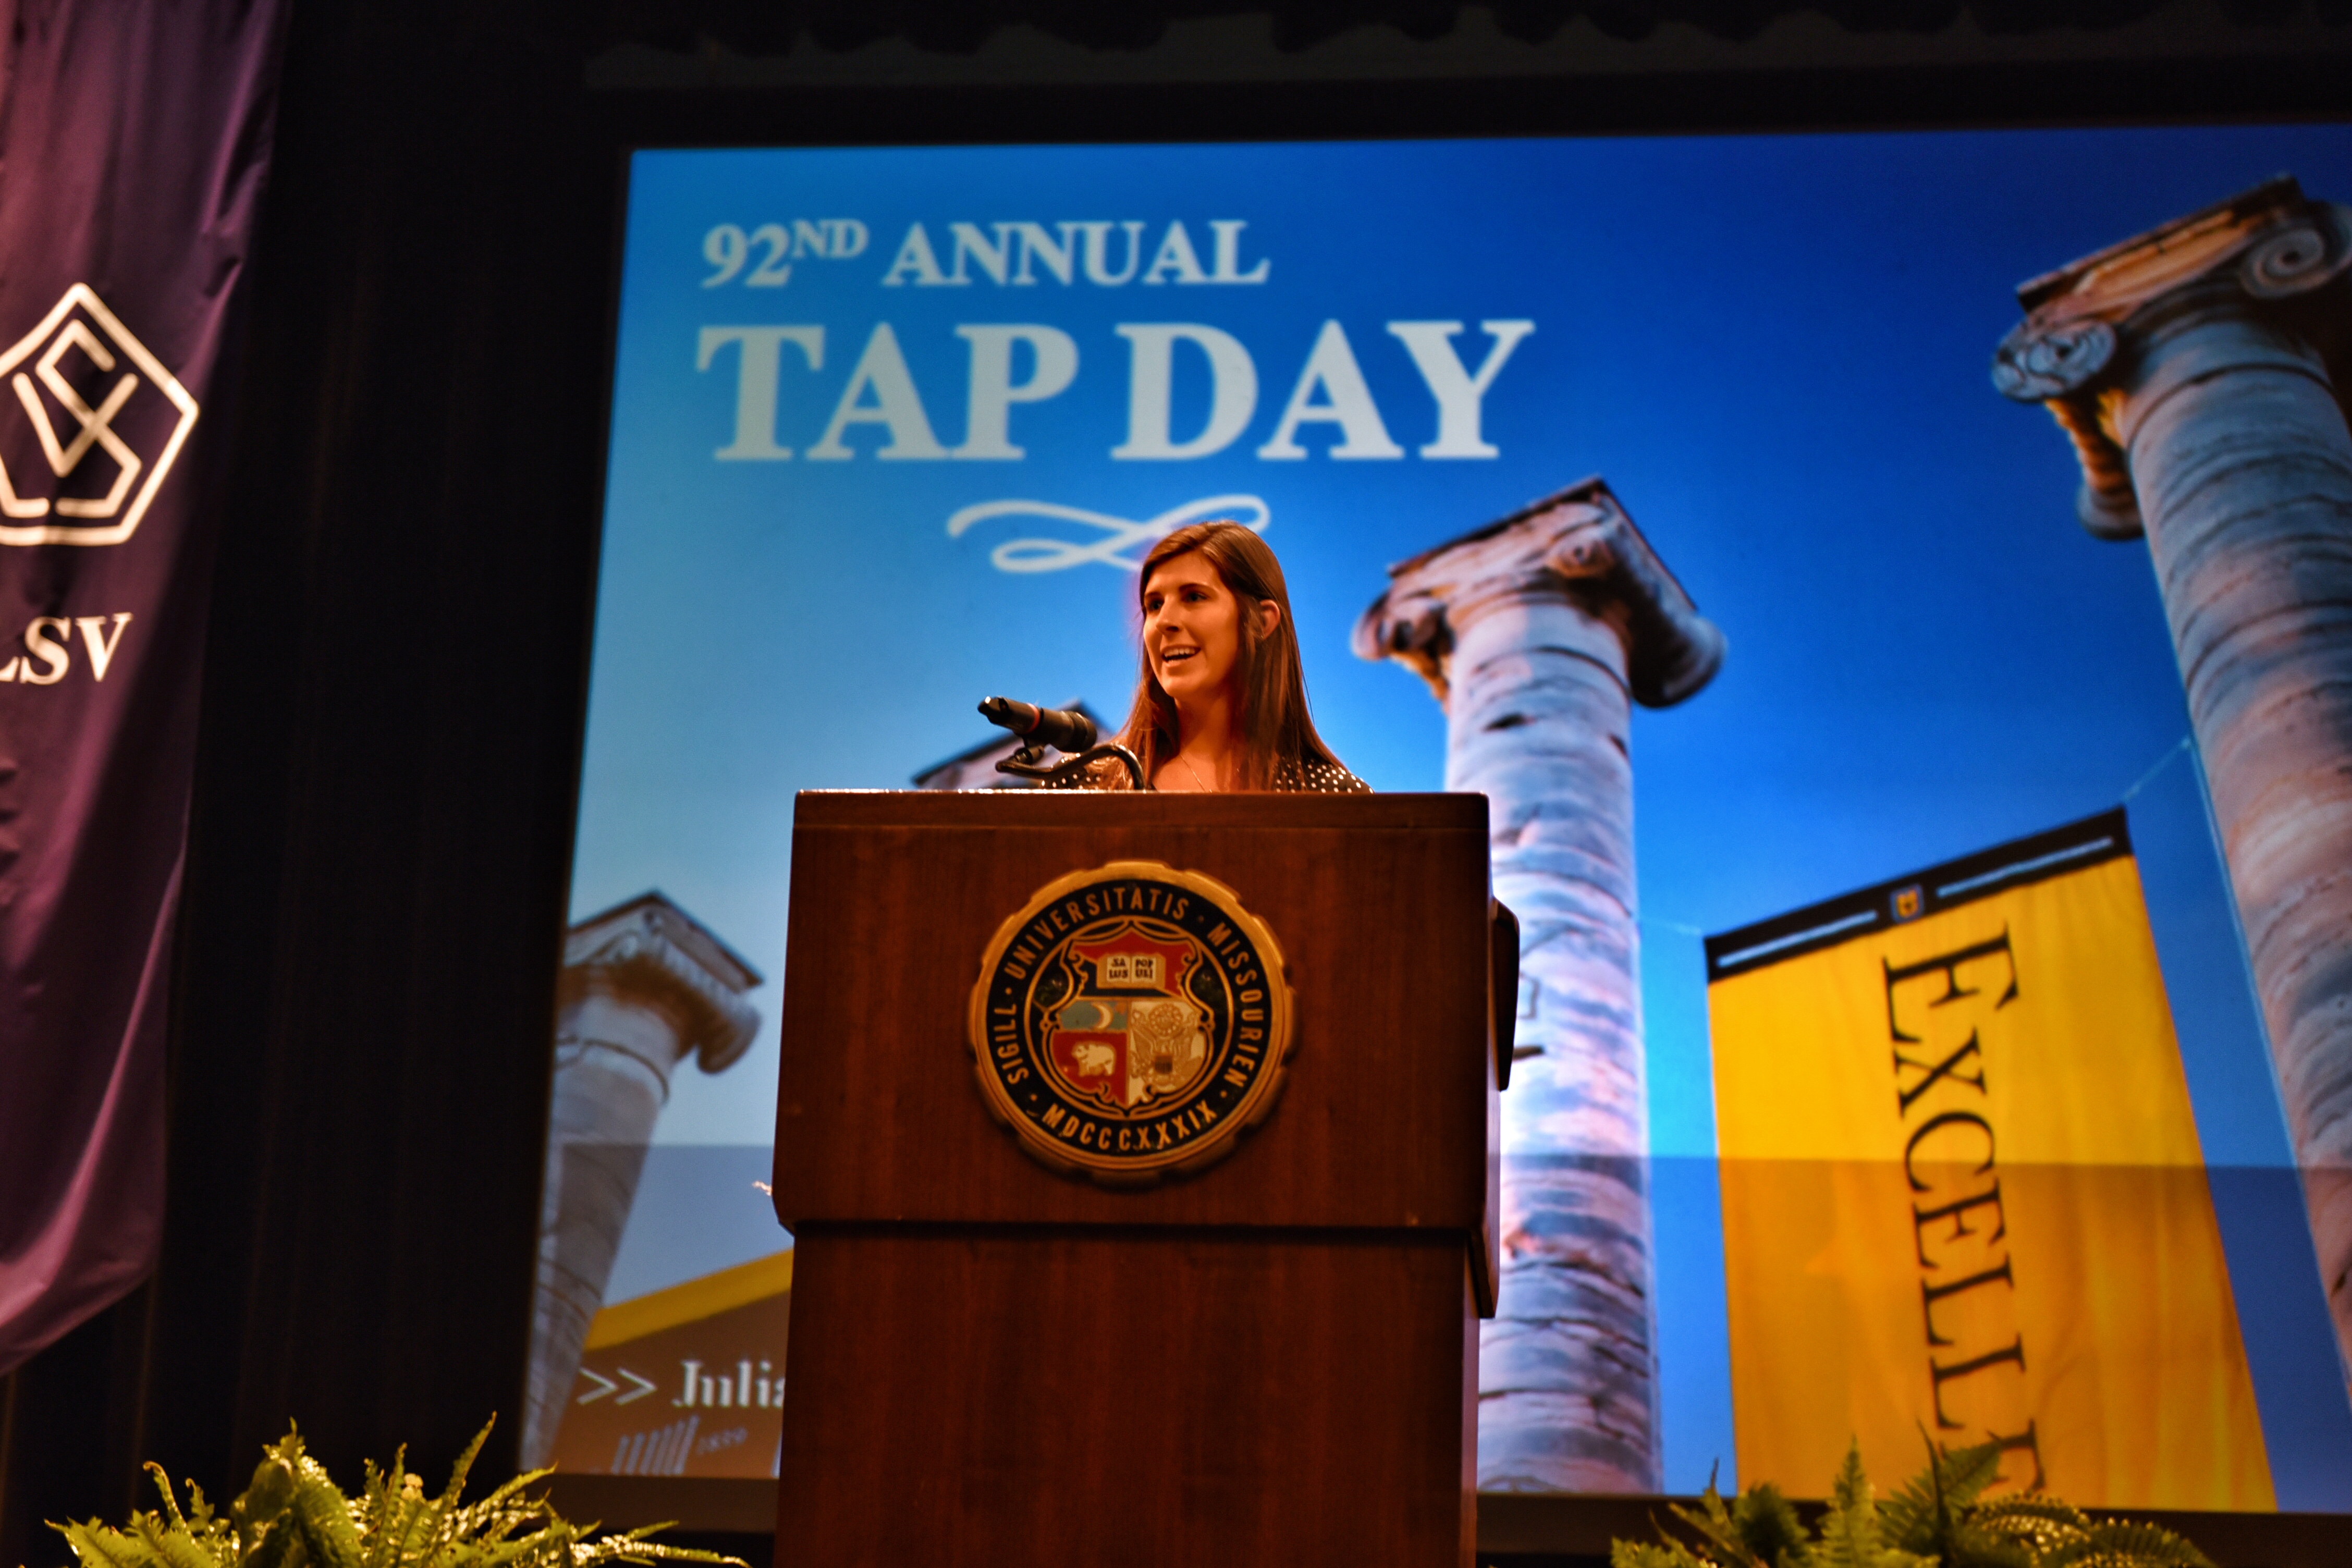 Outgoing MSA President Julia Wopata at the lectern as Tap Day closes